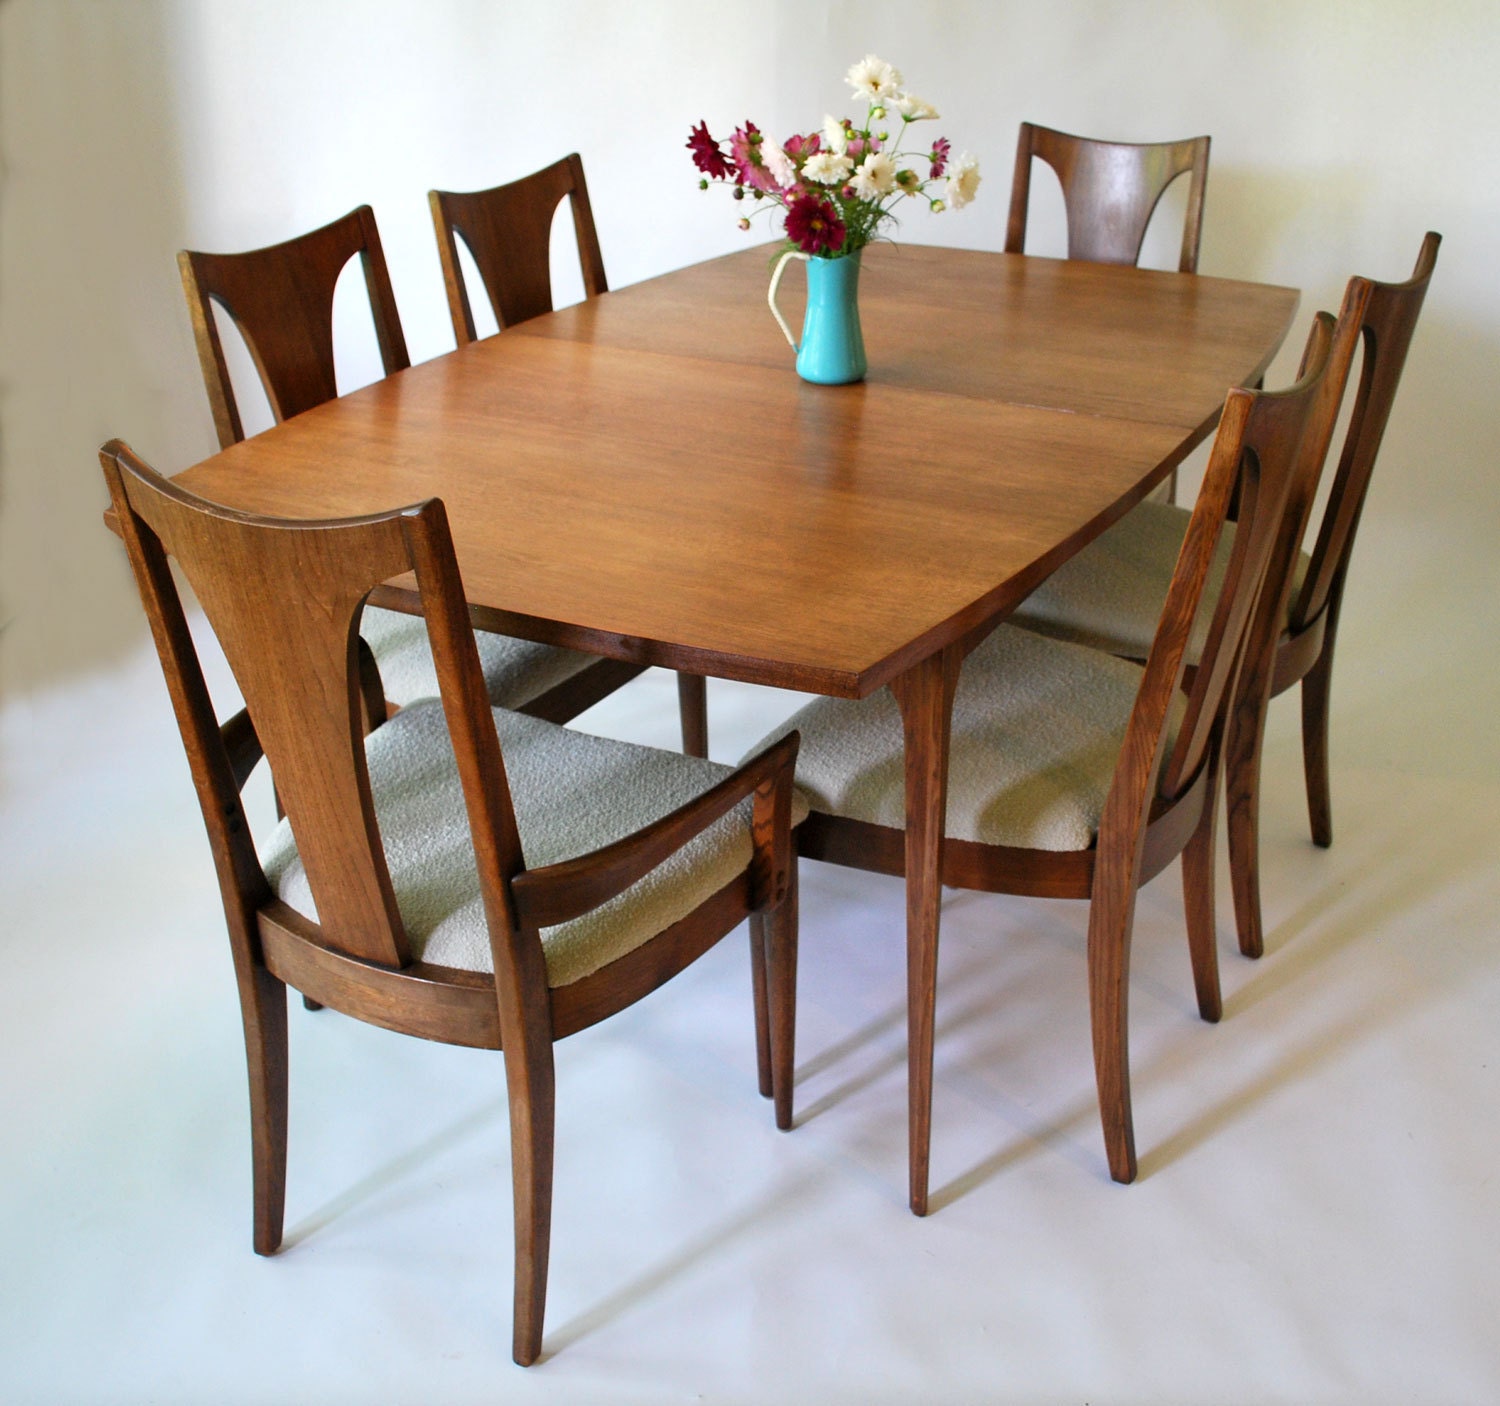 Mid Century Modern Dining Room Table | House Design Home Furniture